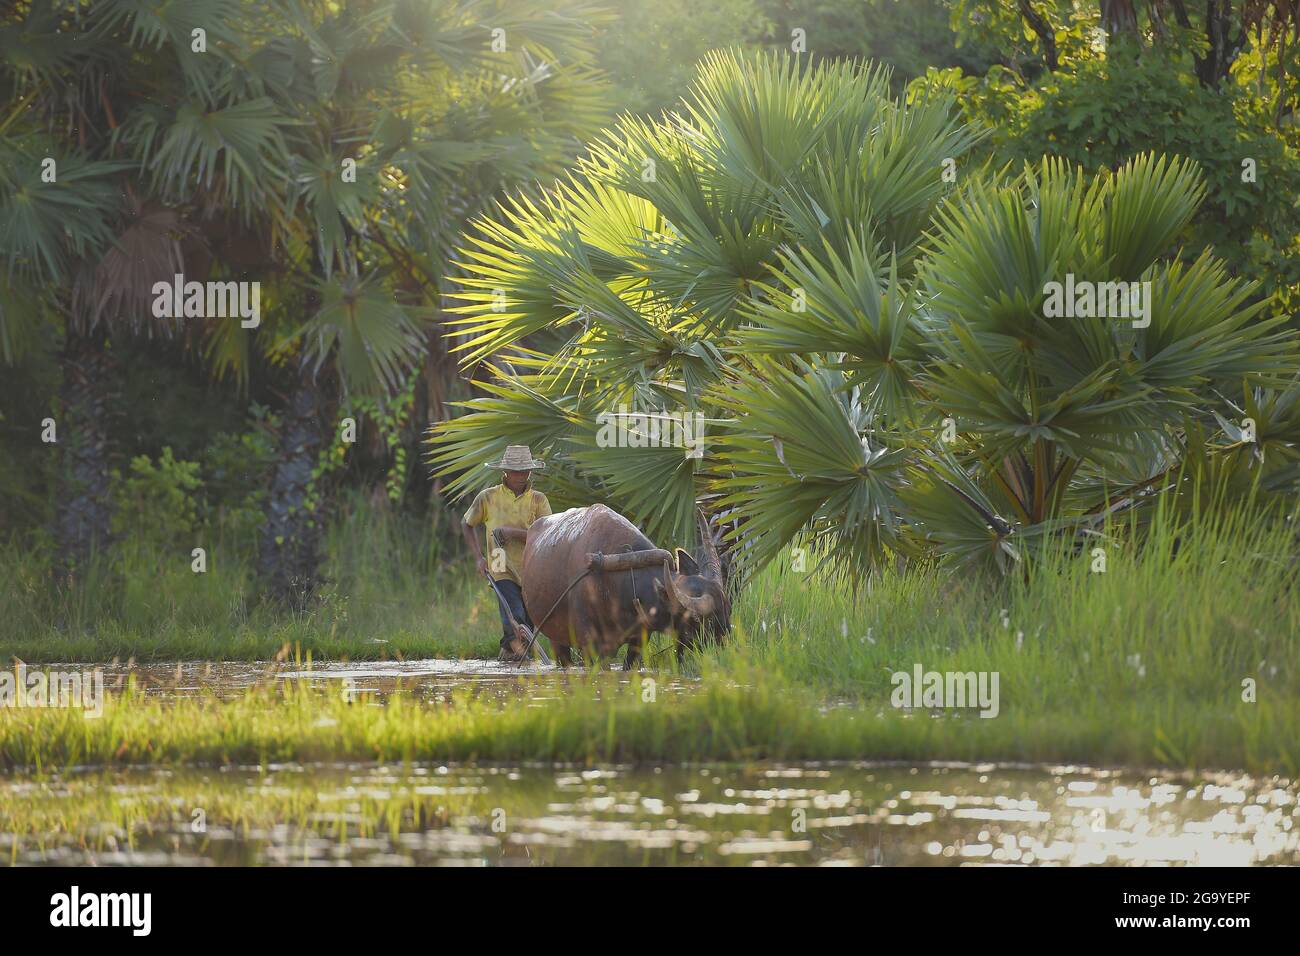 Farmer and his buffalo ploughing a paddy field, Thailand Stock Photo